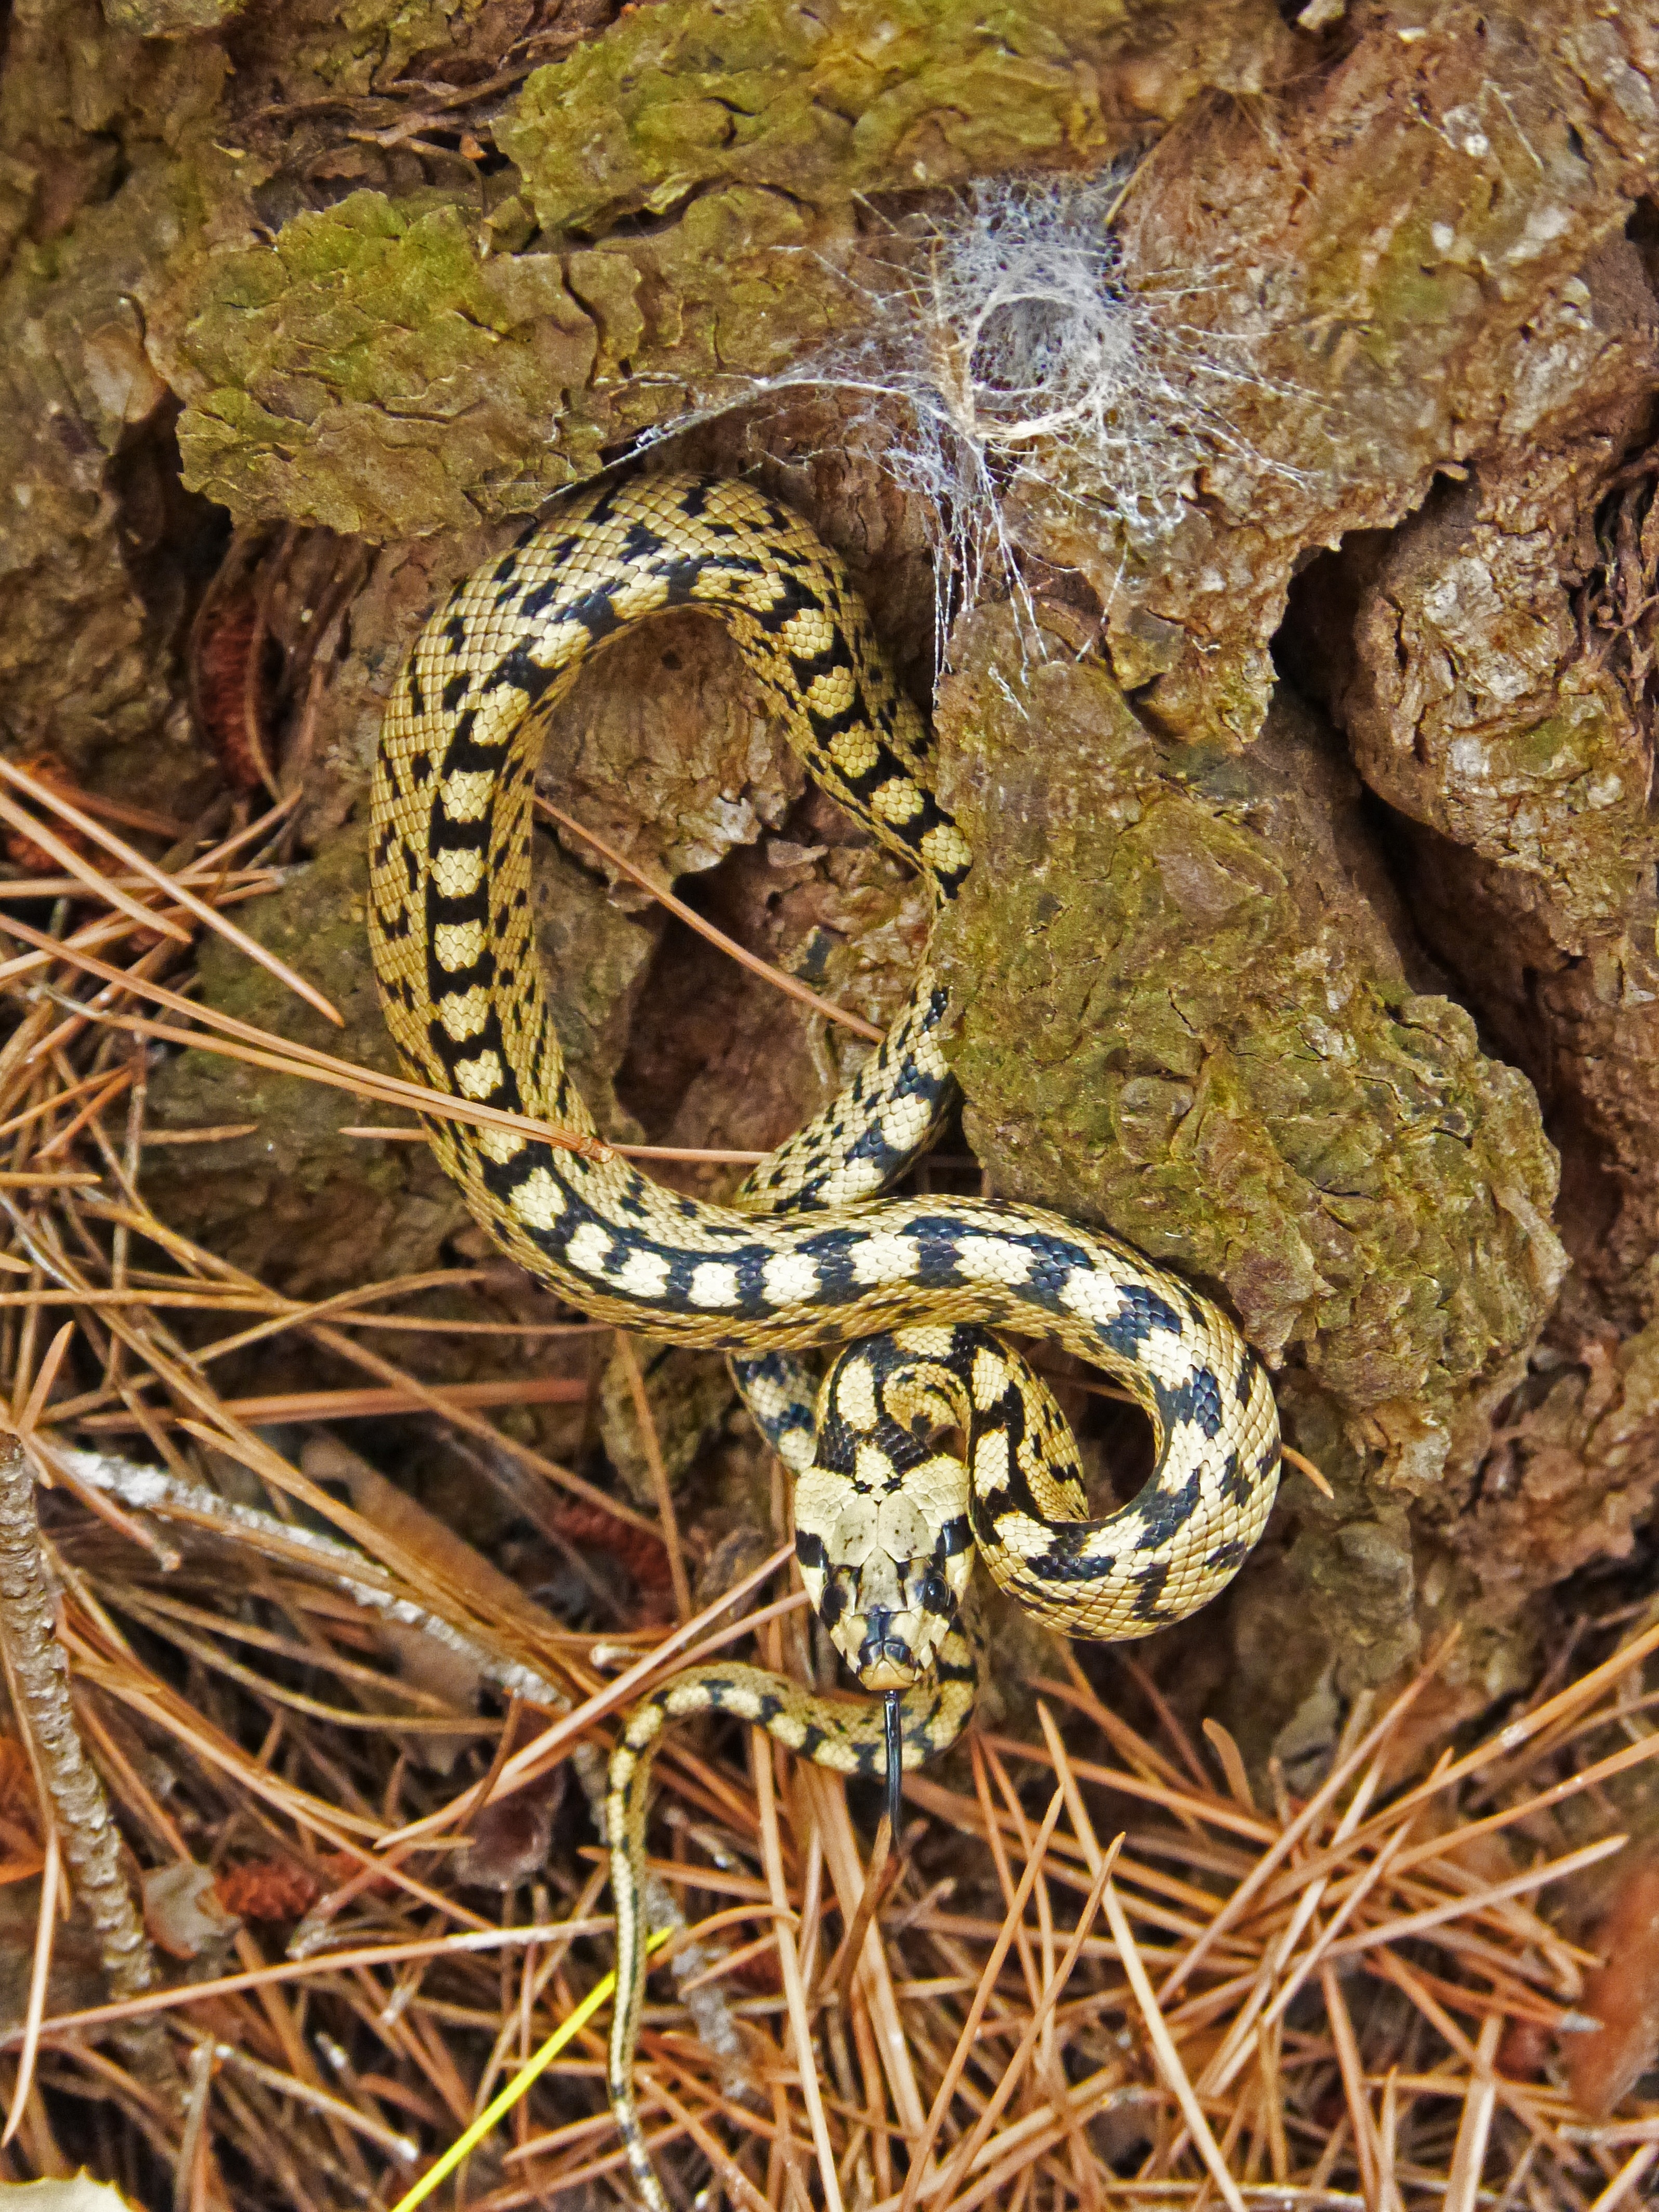 yellow and black snake